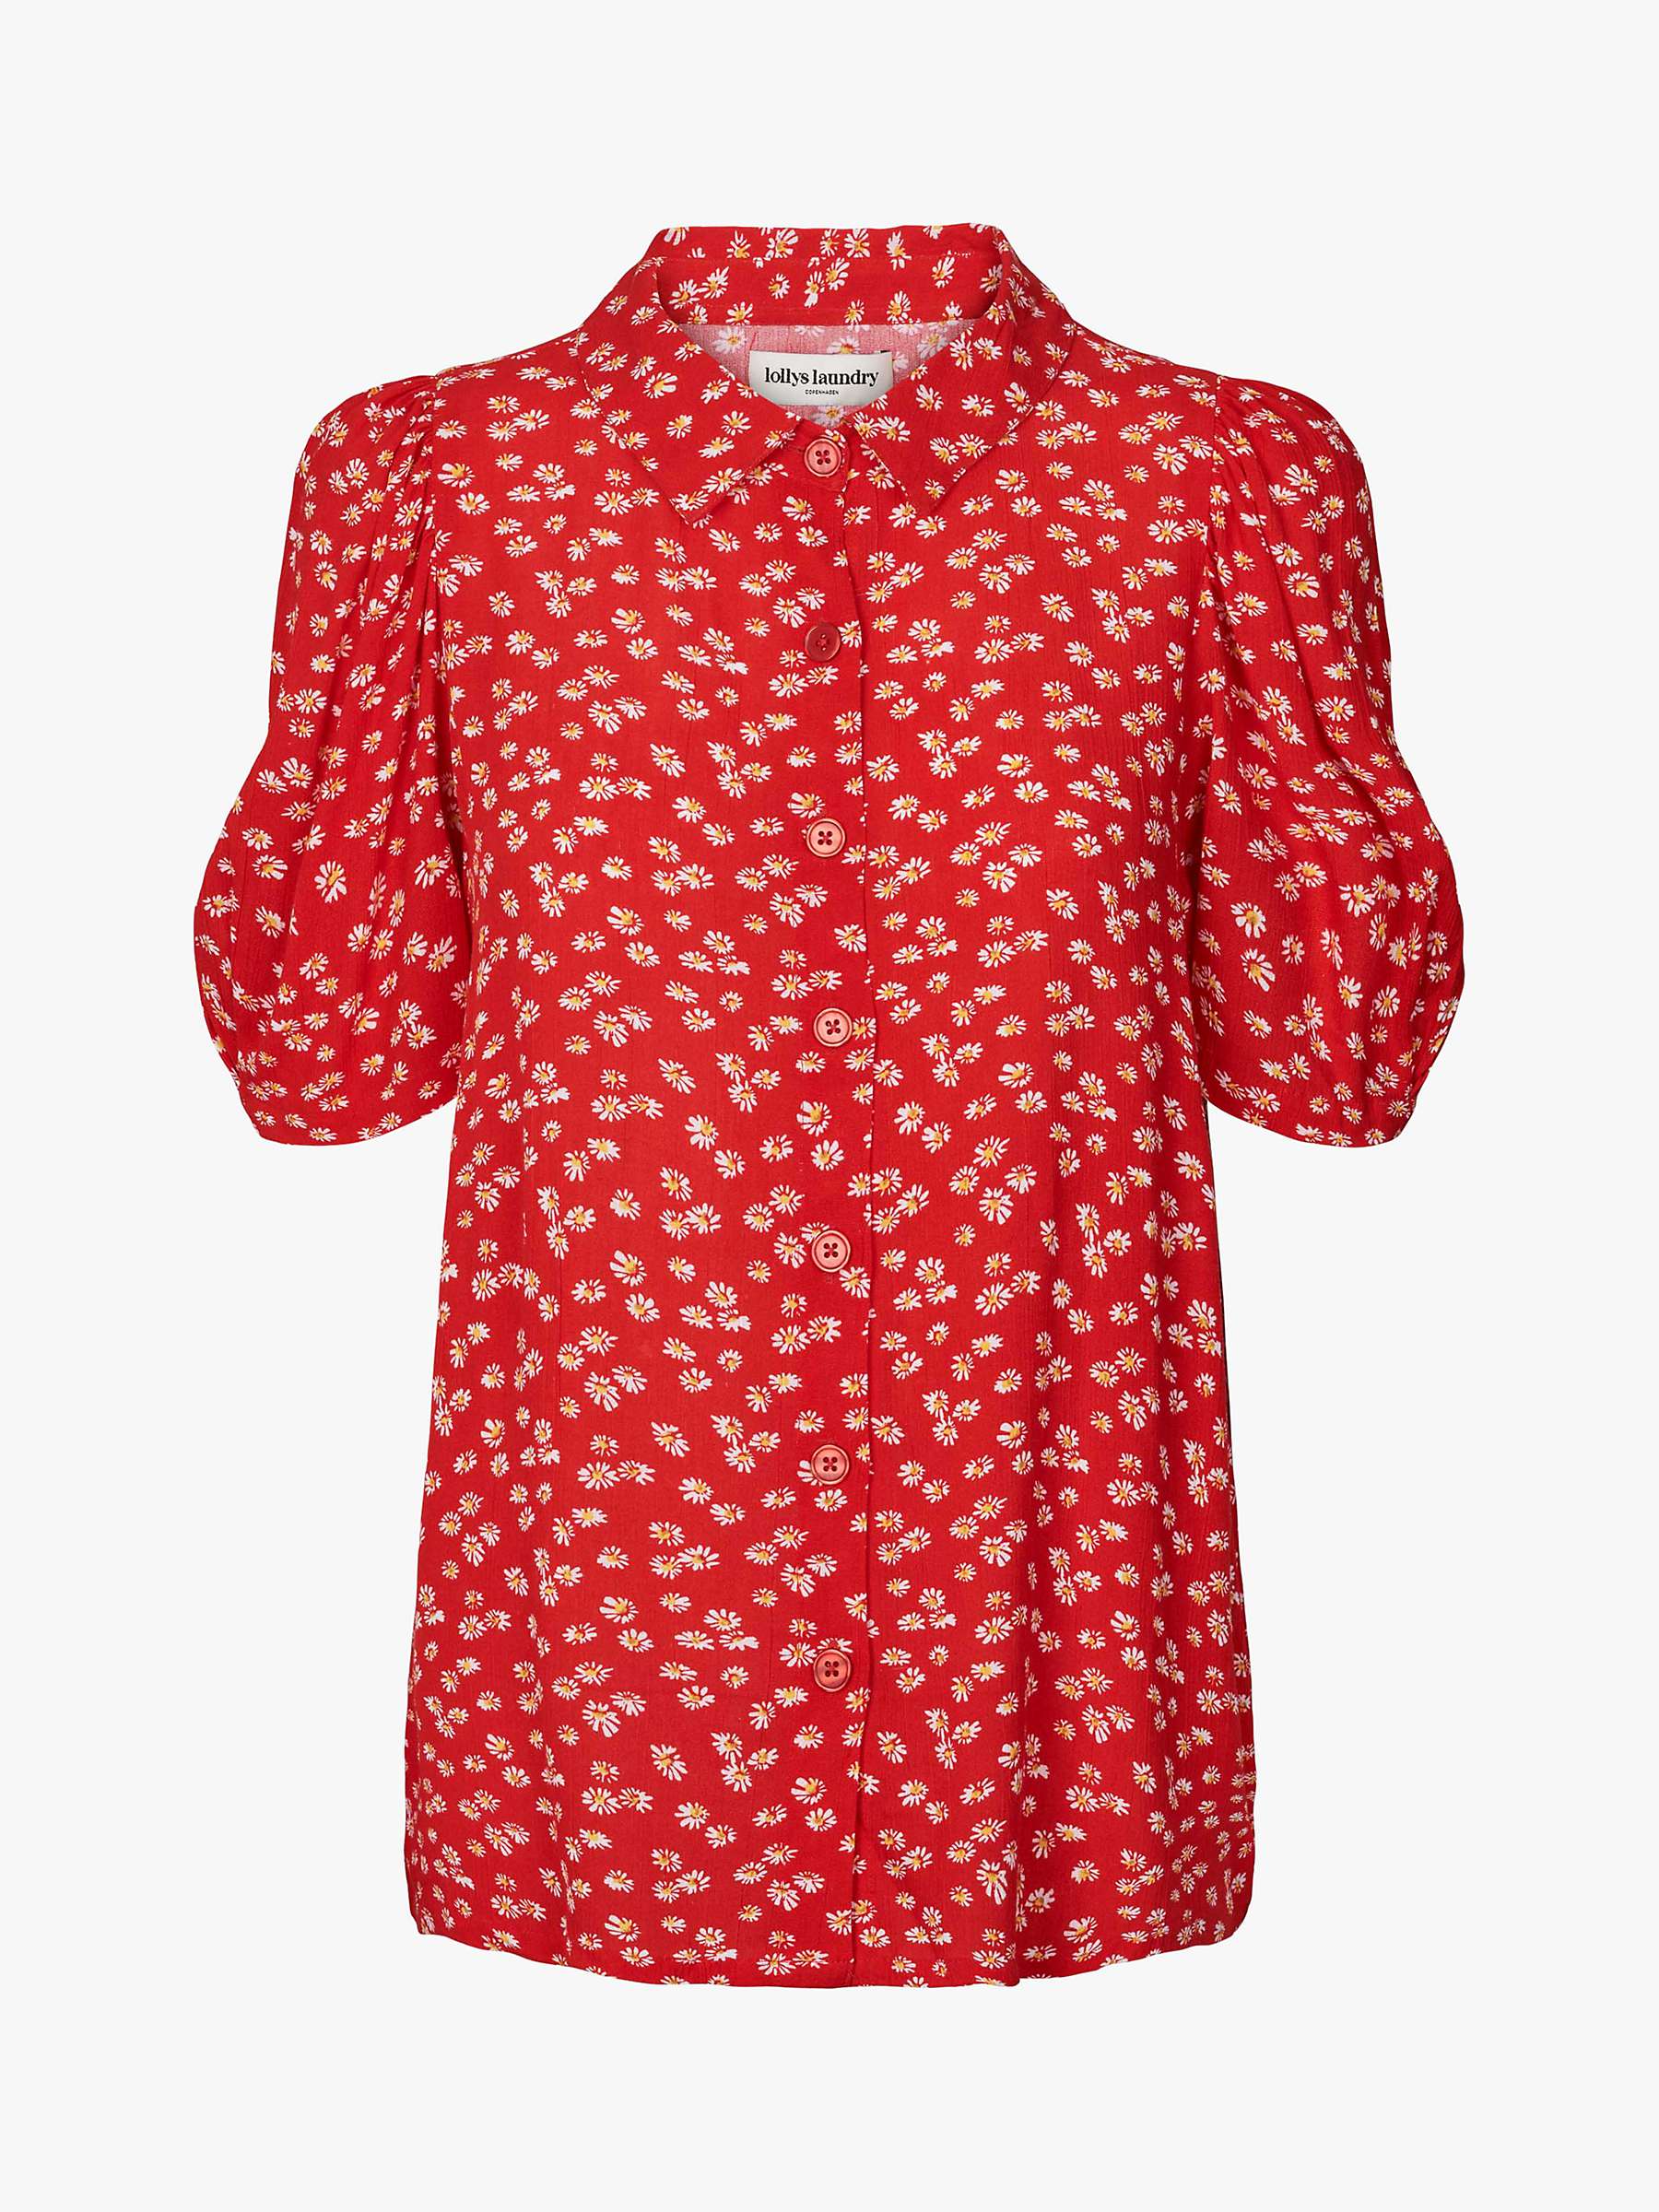 Buy Lollys Laundry Floral Print Blouse, Red/White Online at johnlewis.com